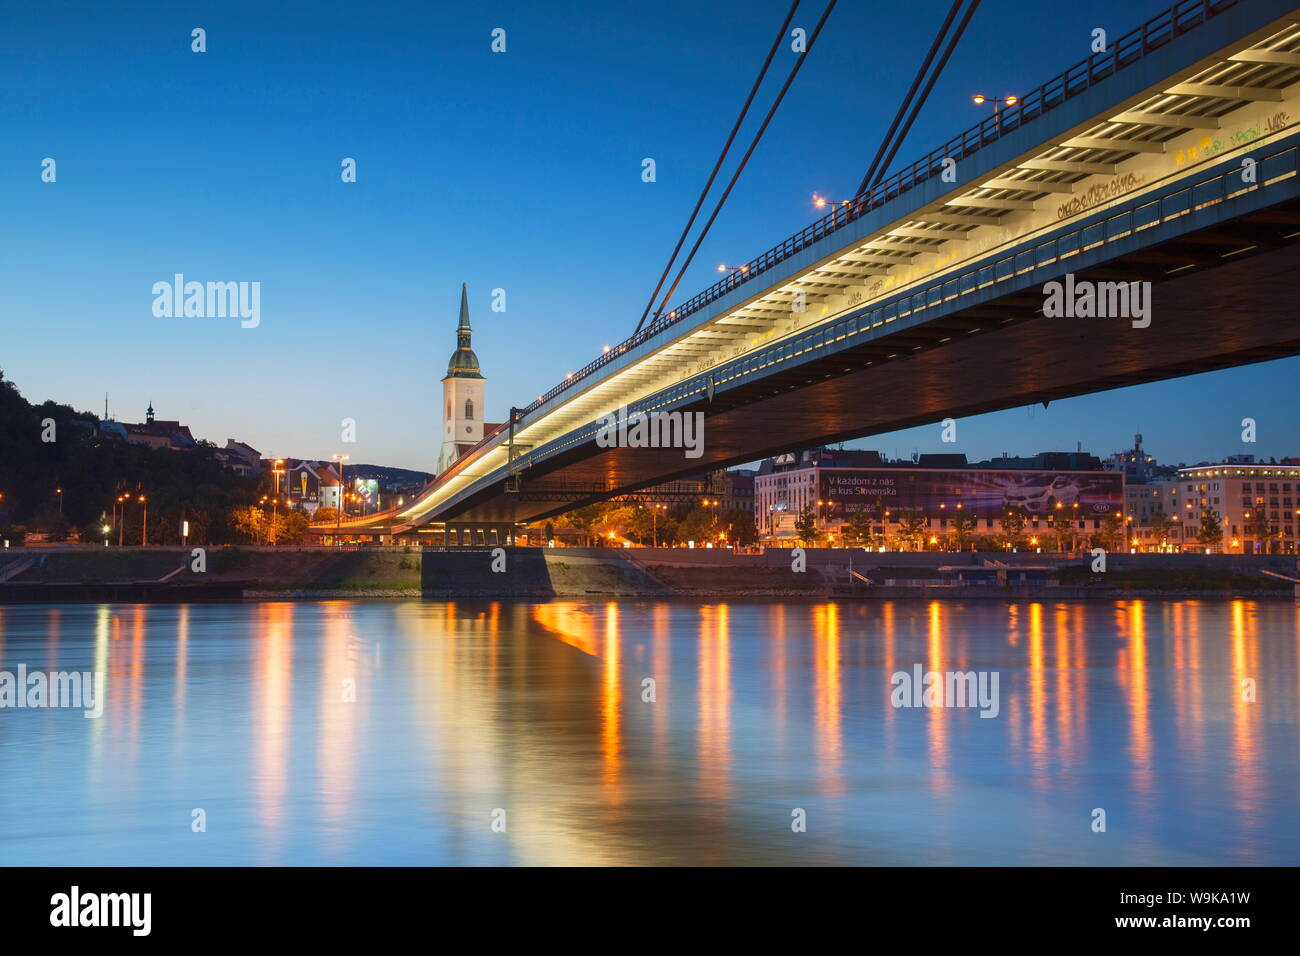 St. Martin's Cathedral and New Bridge over the River Danube at dusk, Bratislava, Slovakia, Europe Stock Photo